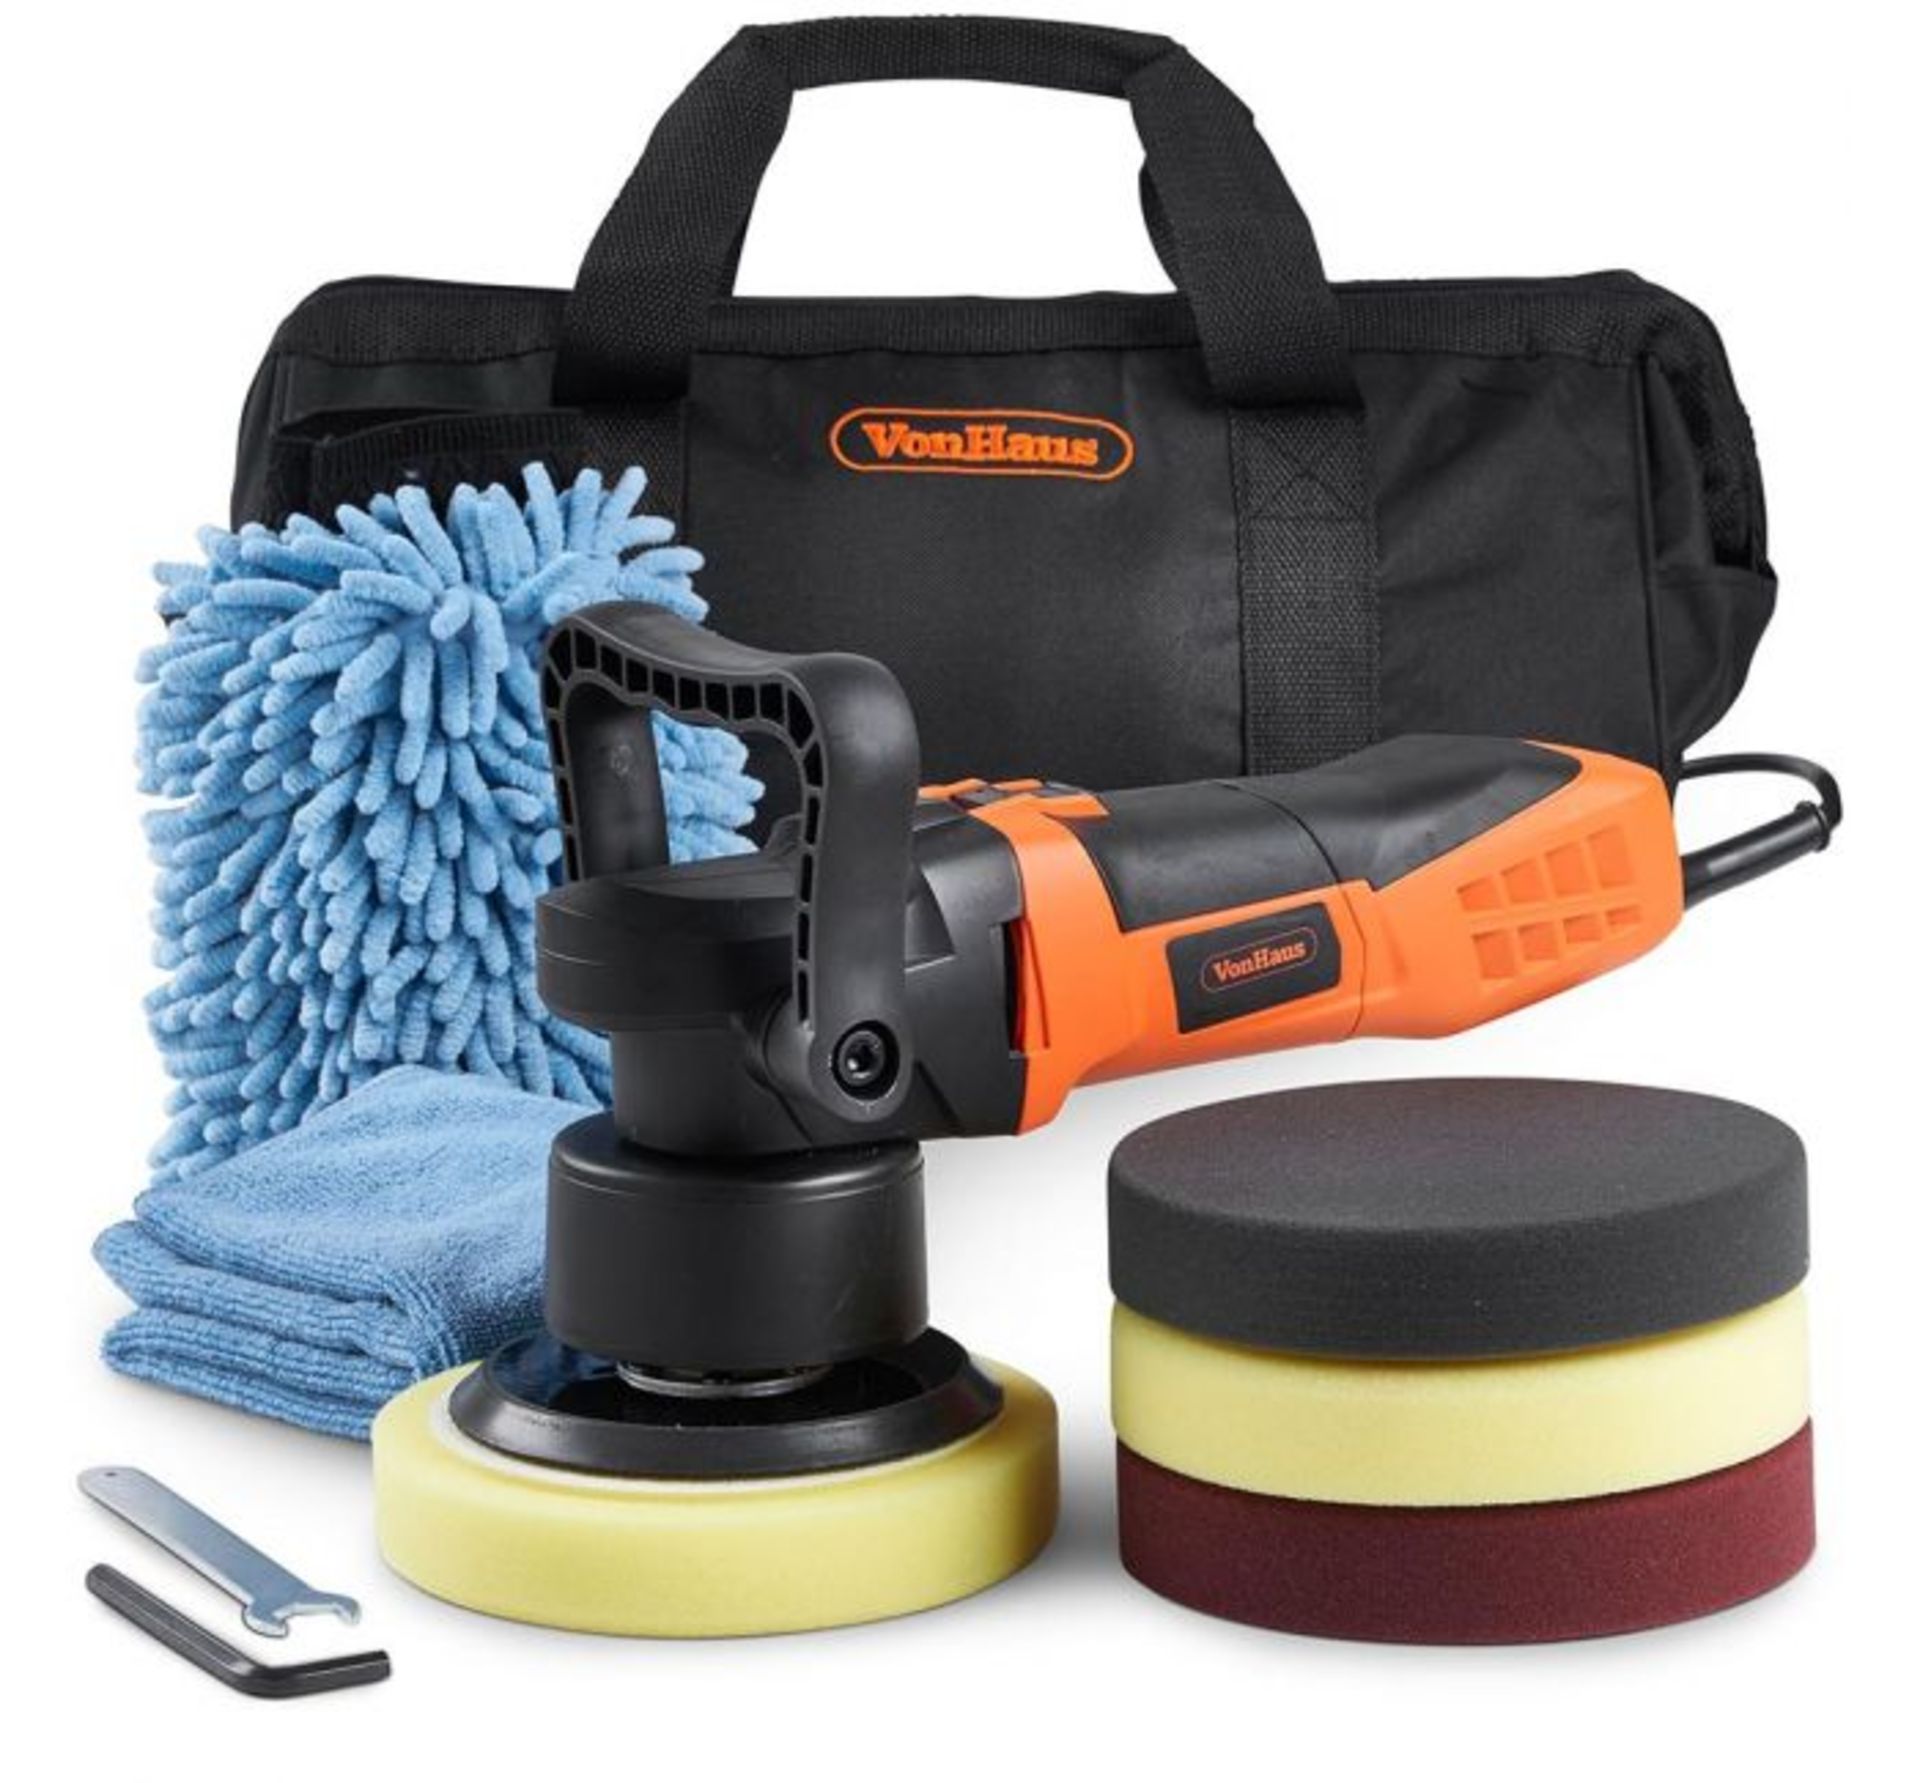 (WK5) Random Orbital Polisher Kit 600W power, the polisher operates at six speed settings from... - Image 3 of 3